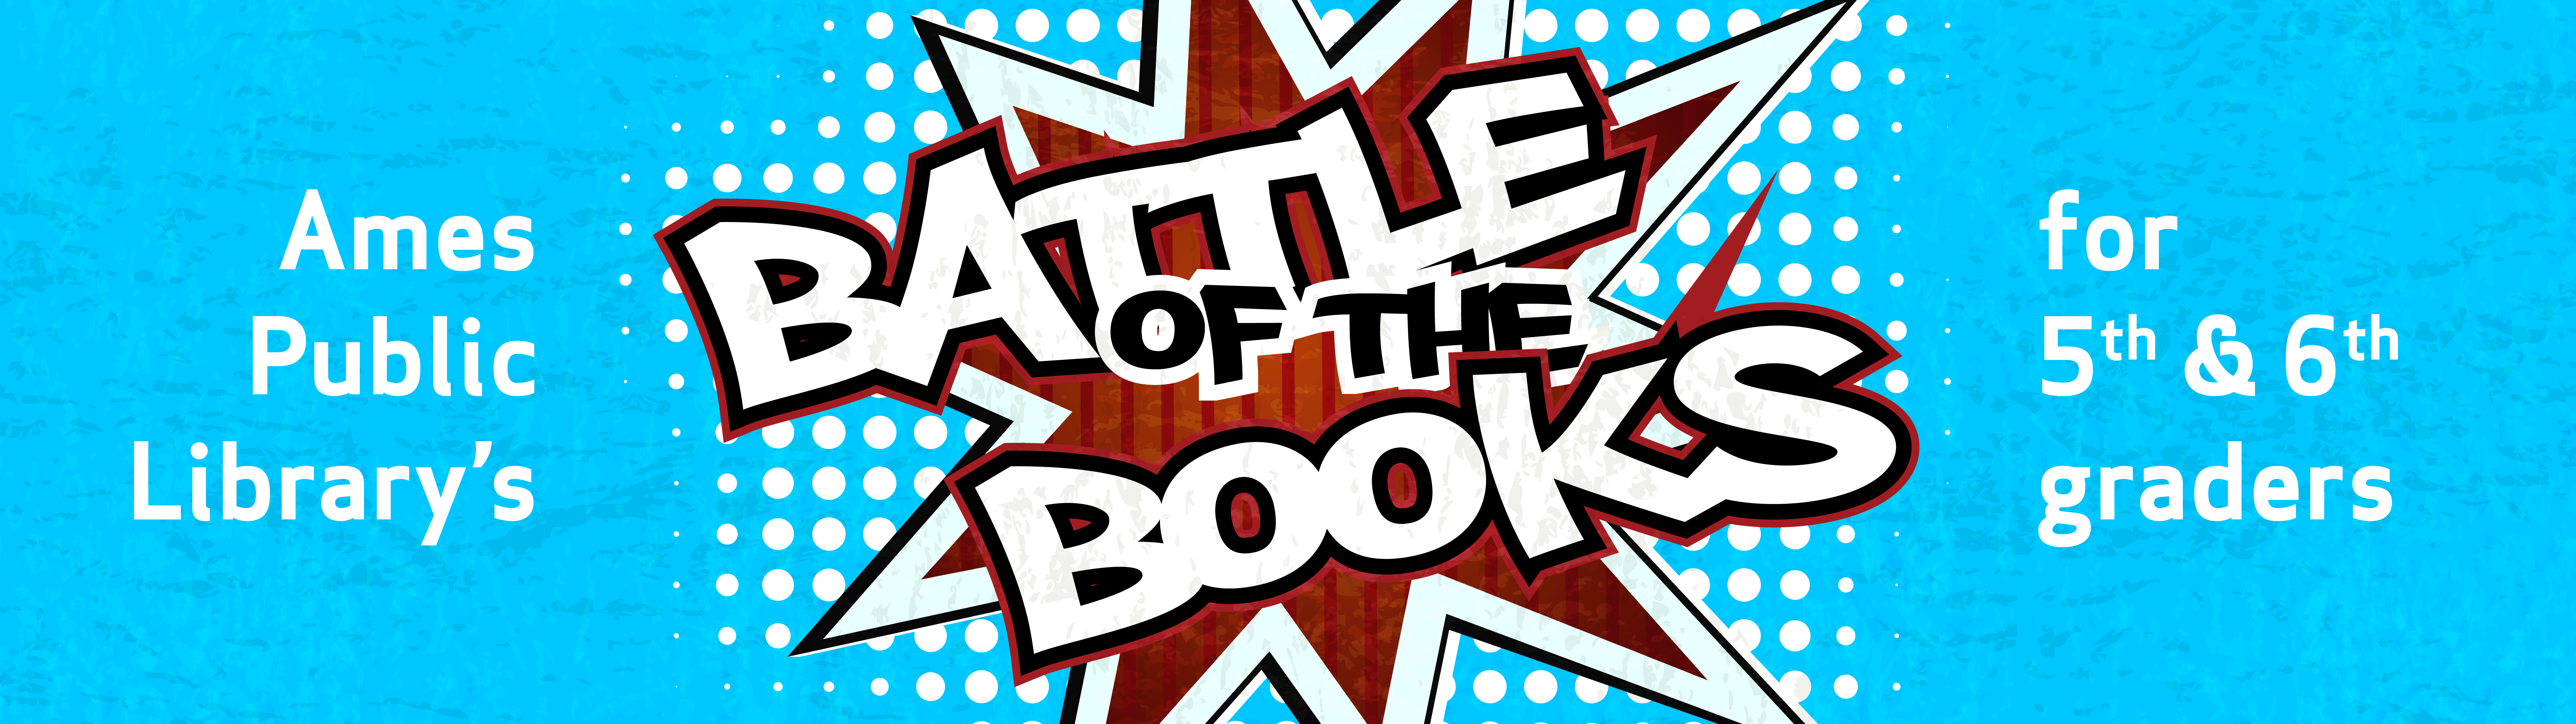 Ames Public Library's Battle of the Books for 5th & 6th graders